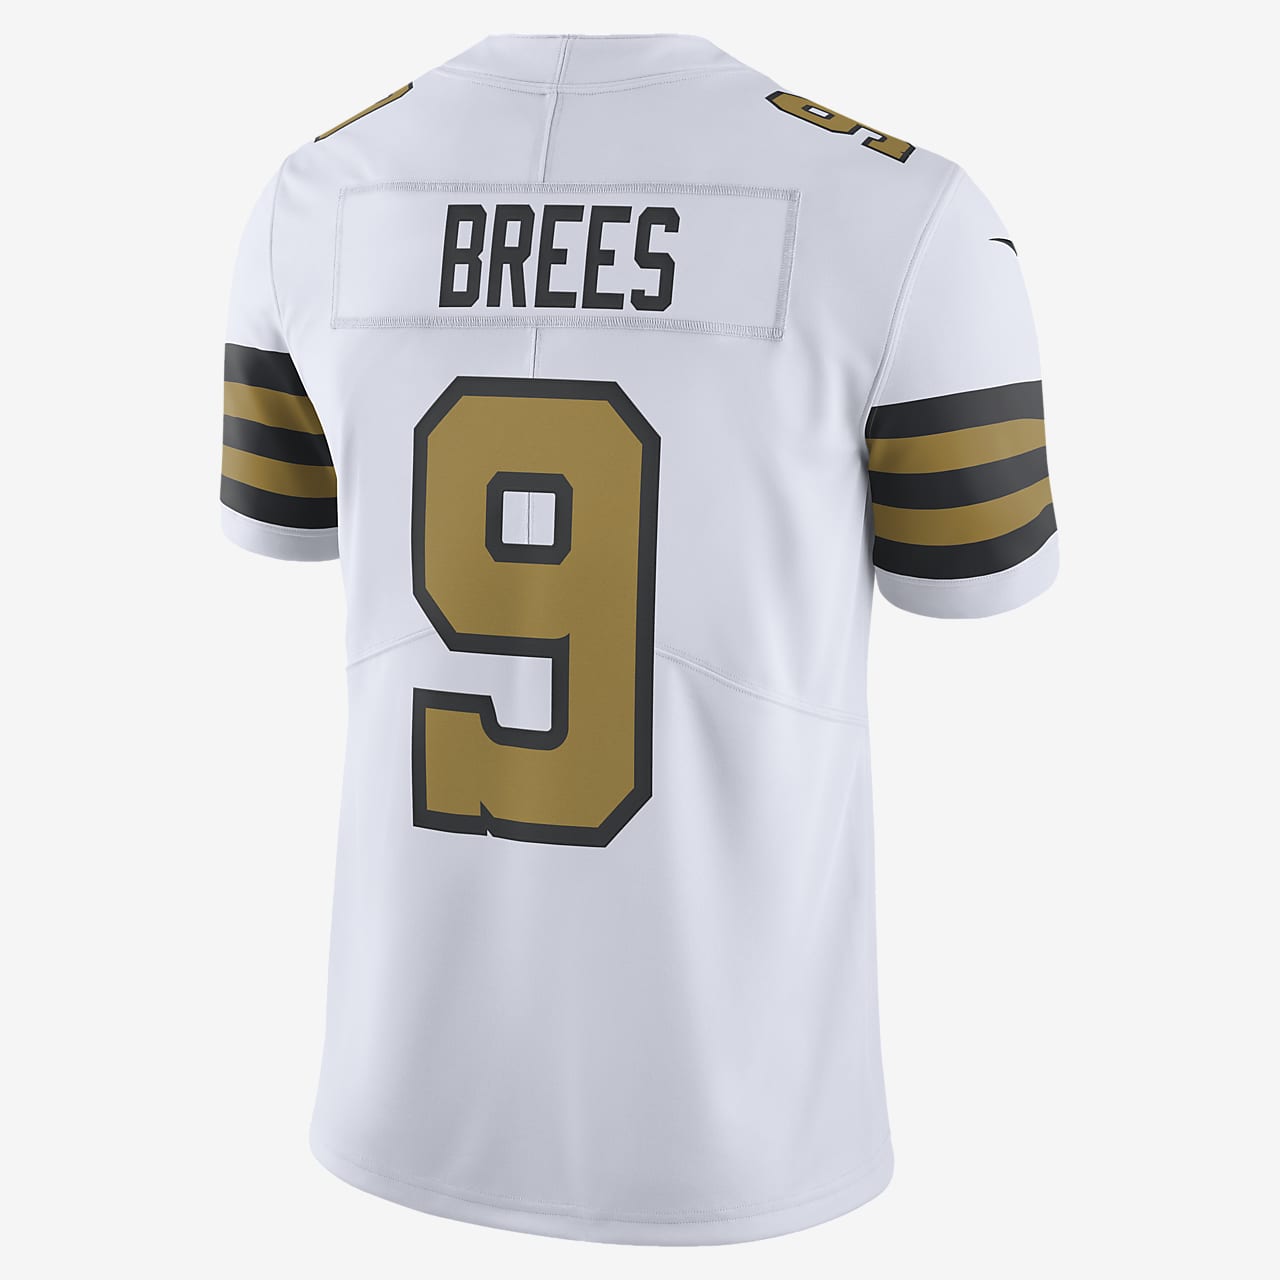 drew brees jersey color rush